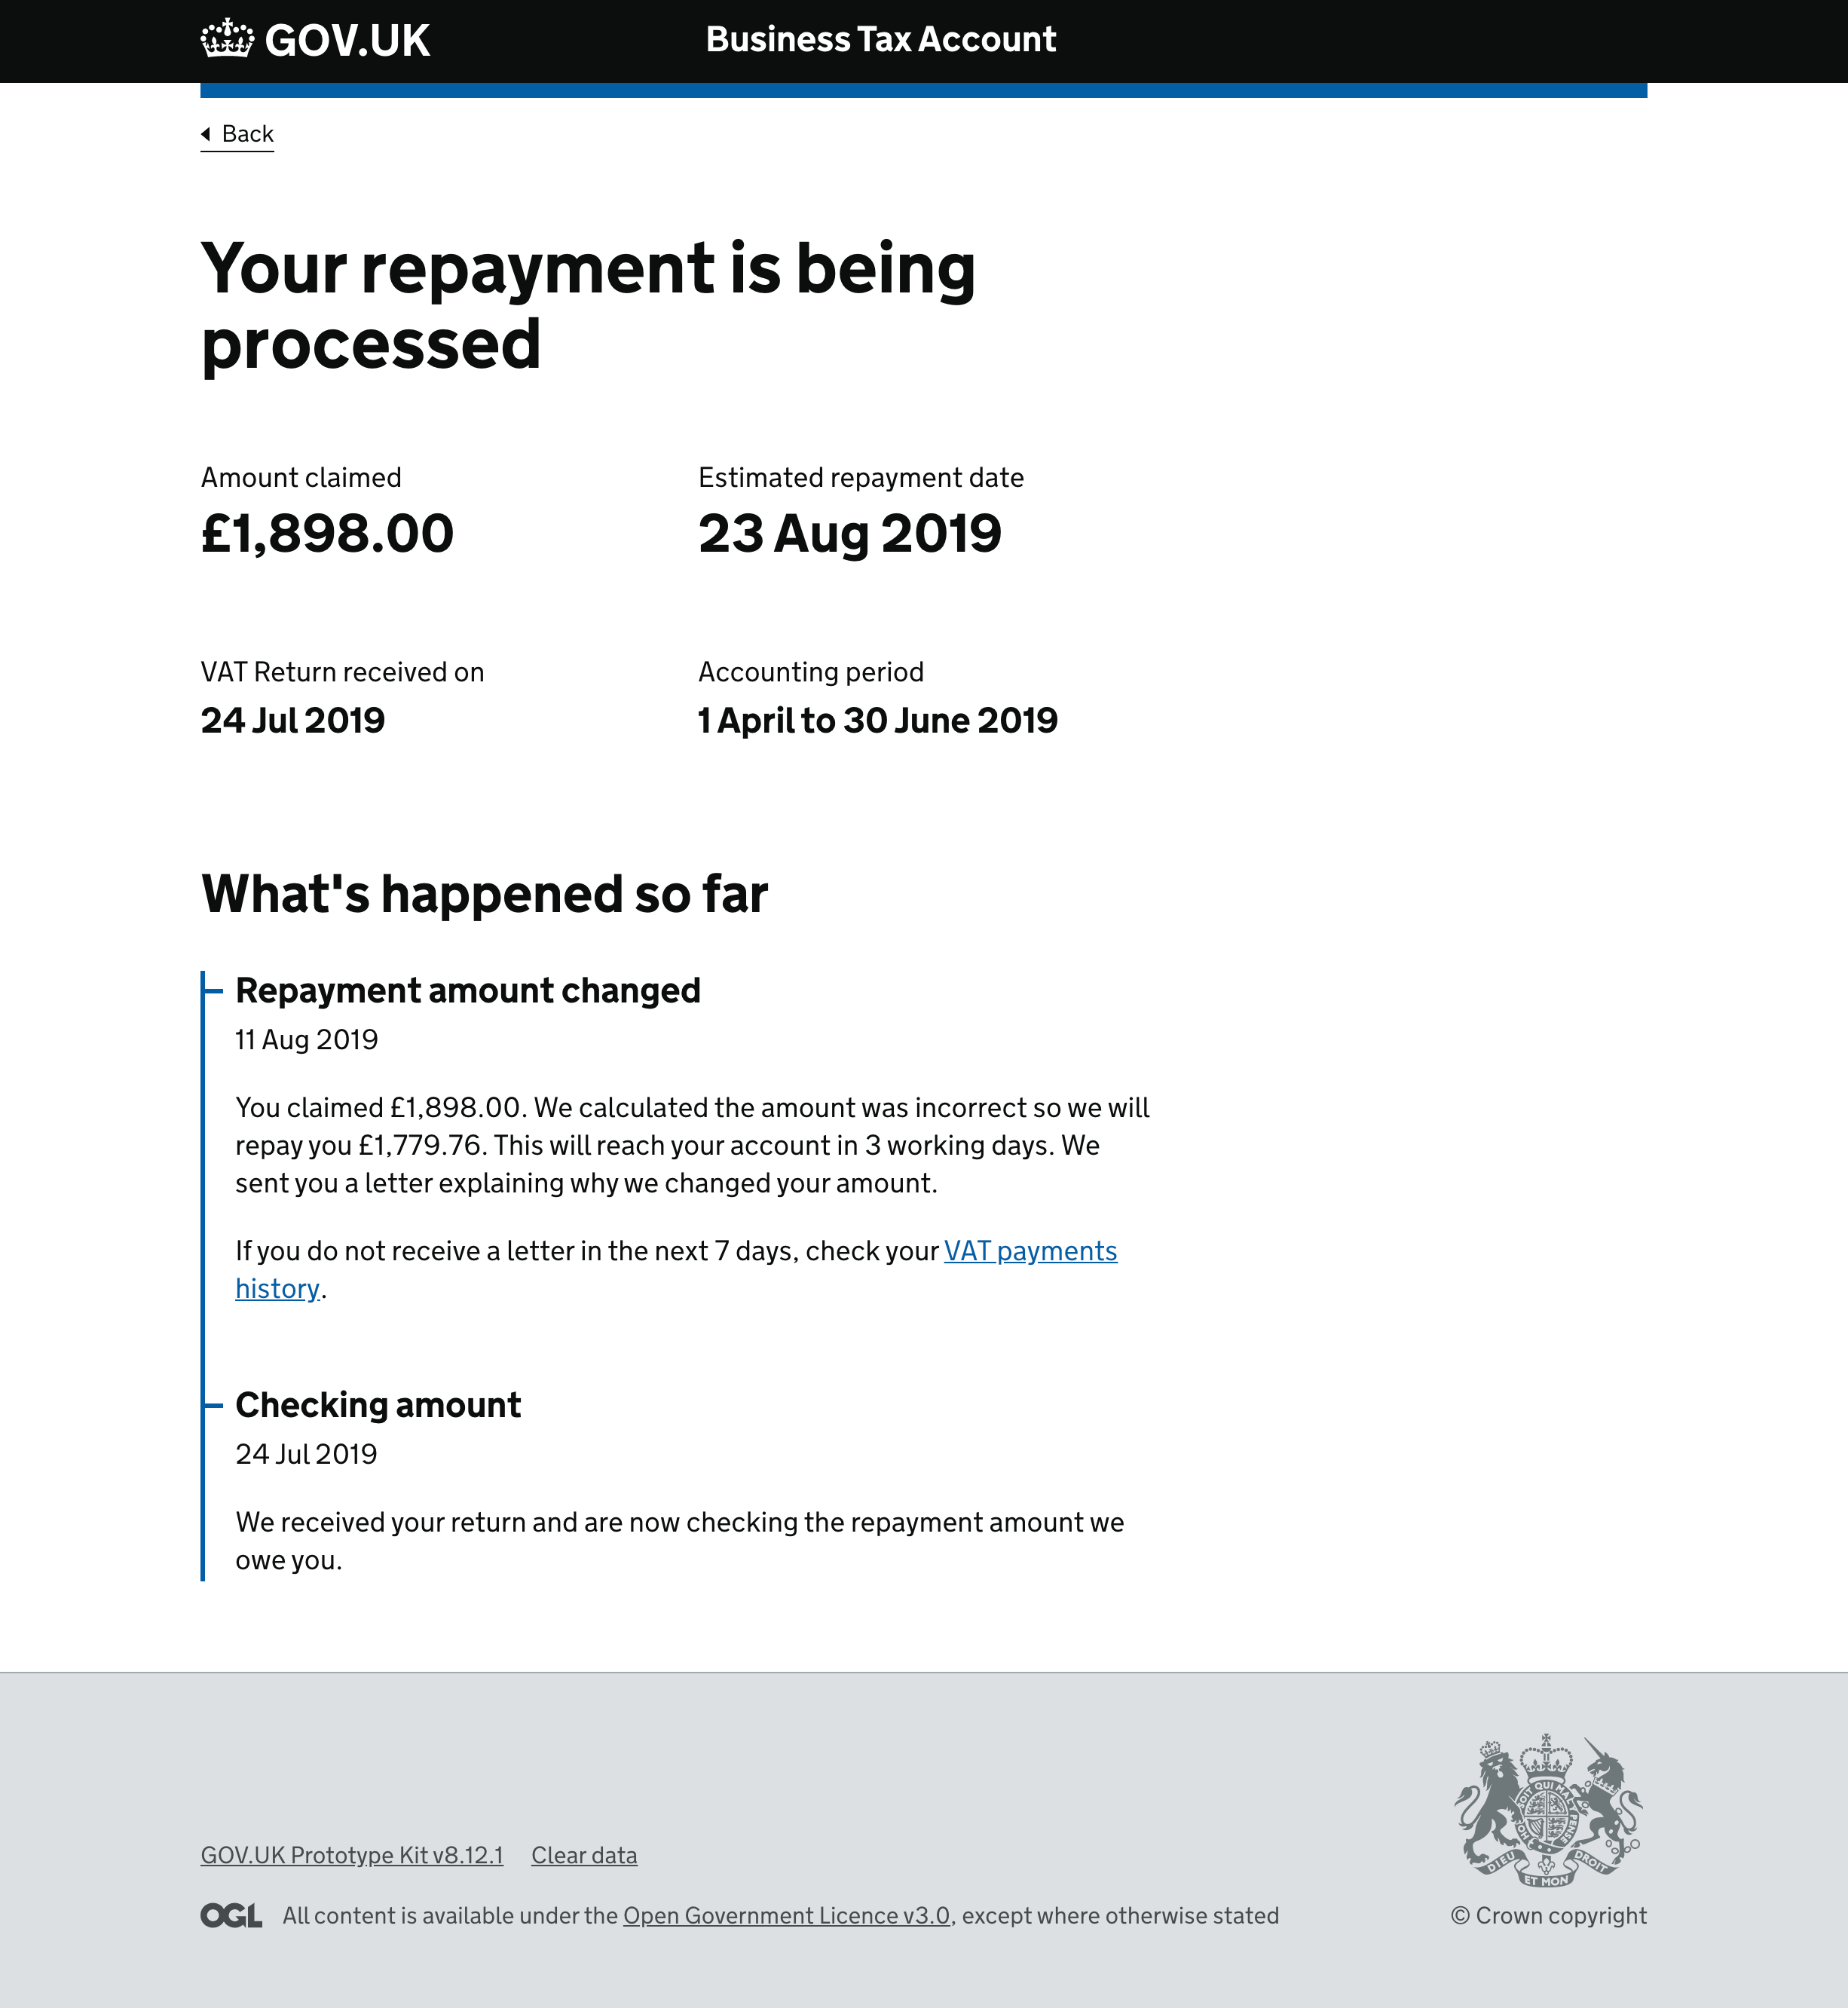 A screenshot showing the final design for the repayment timeline